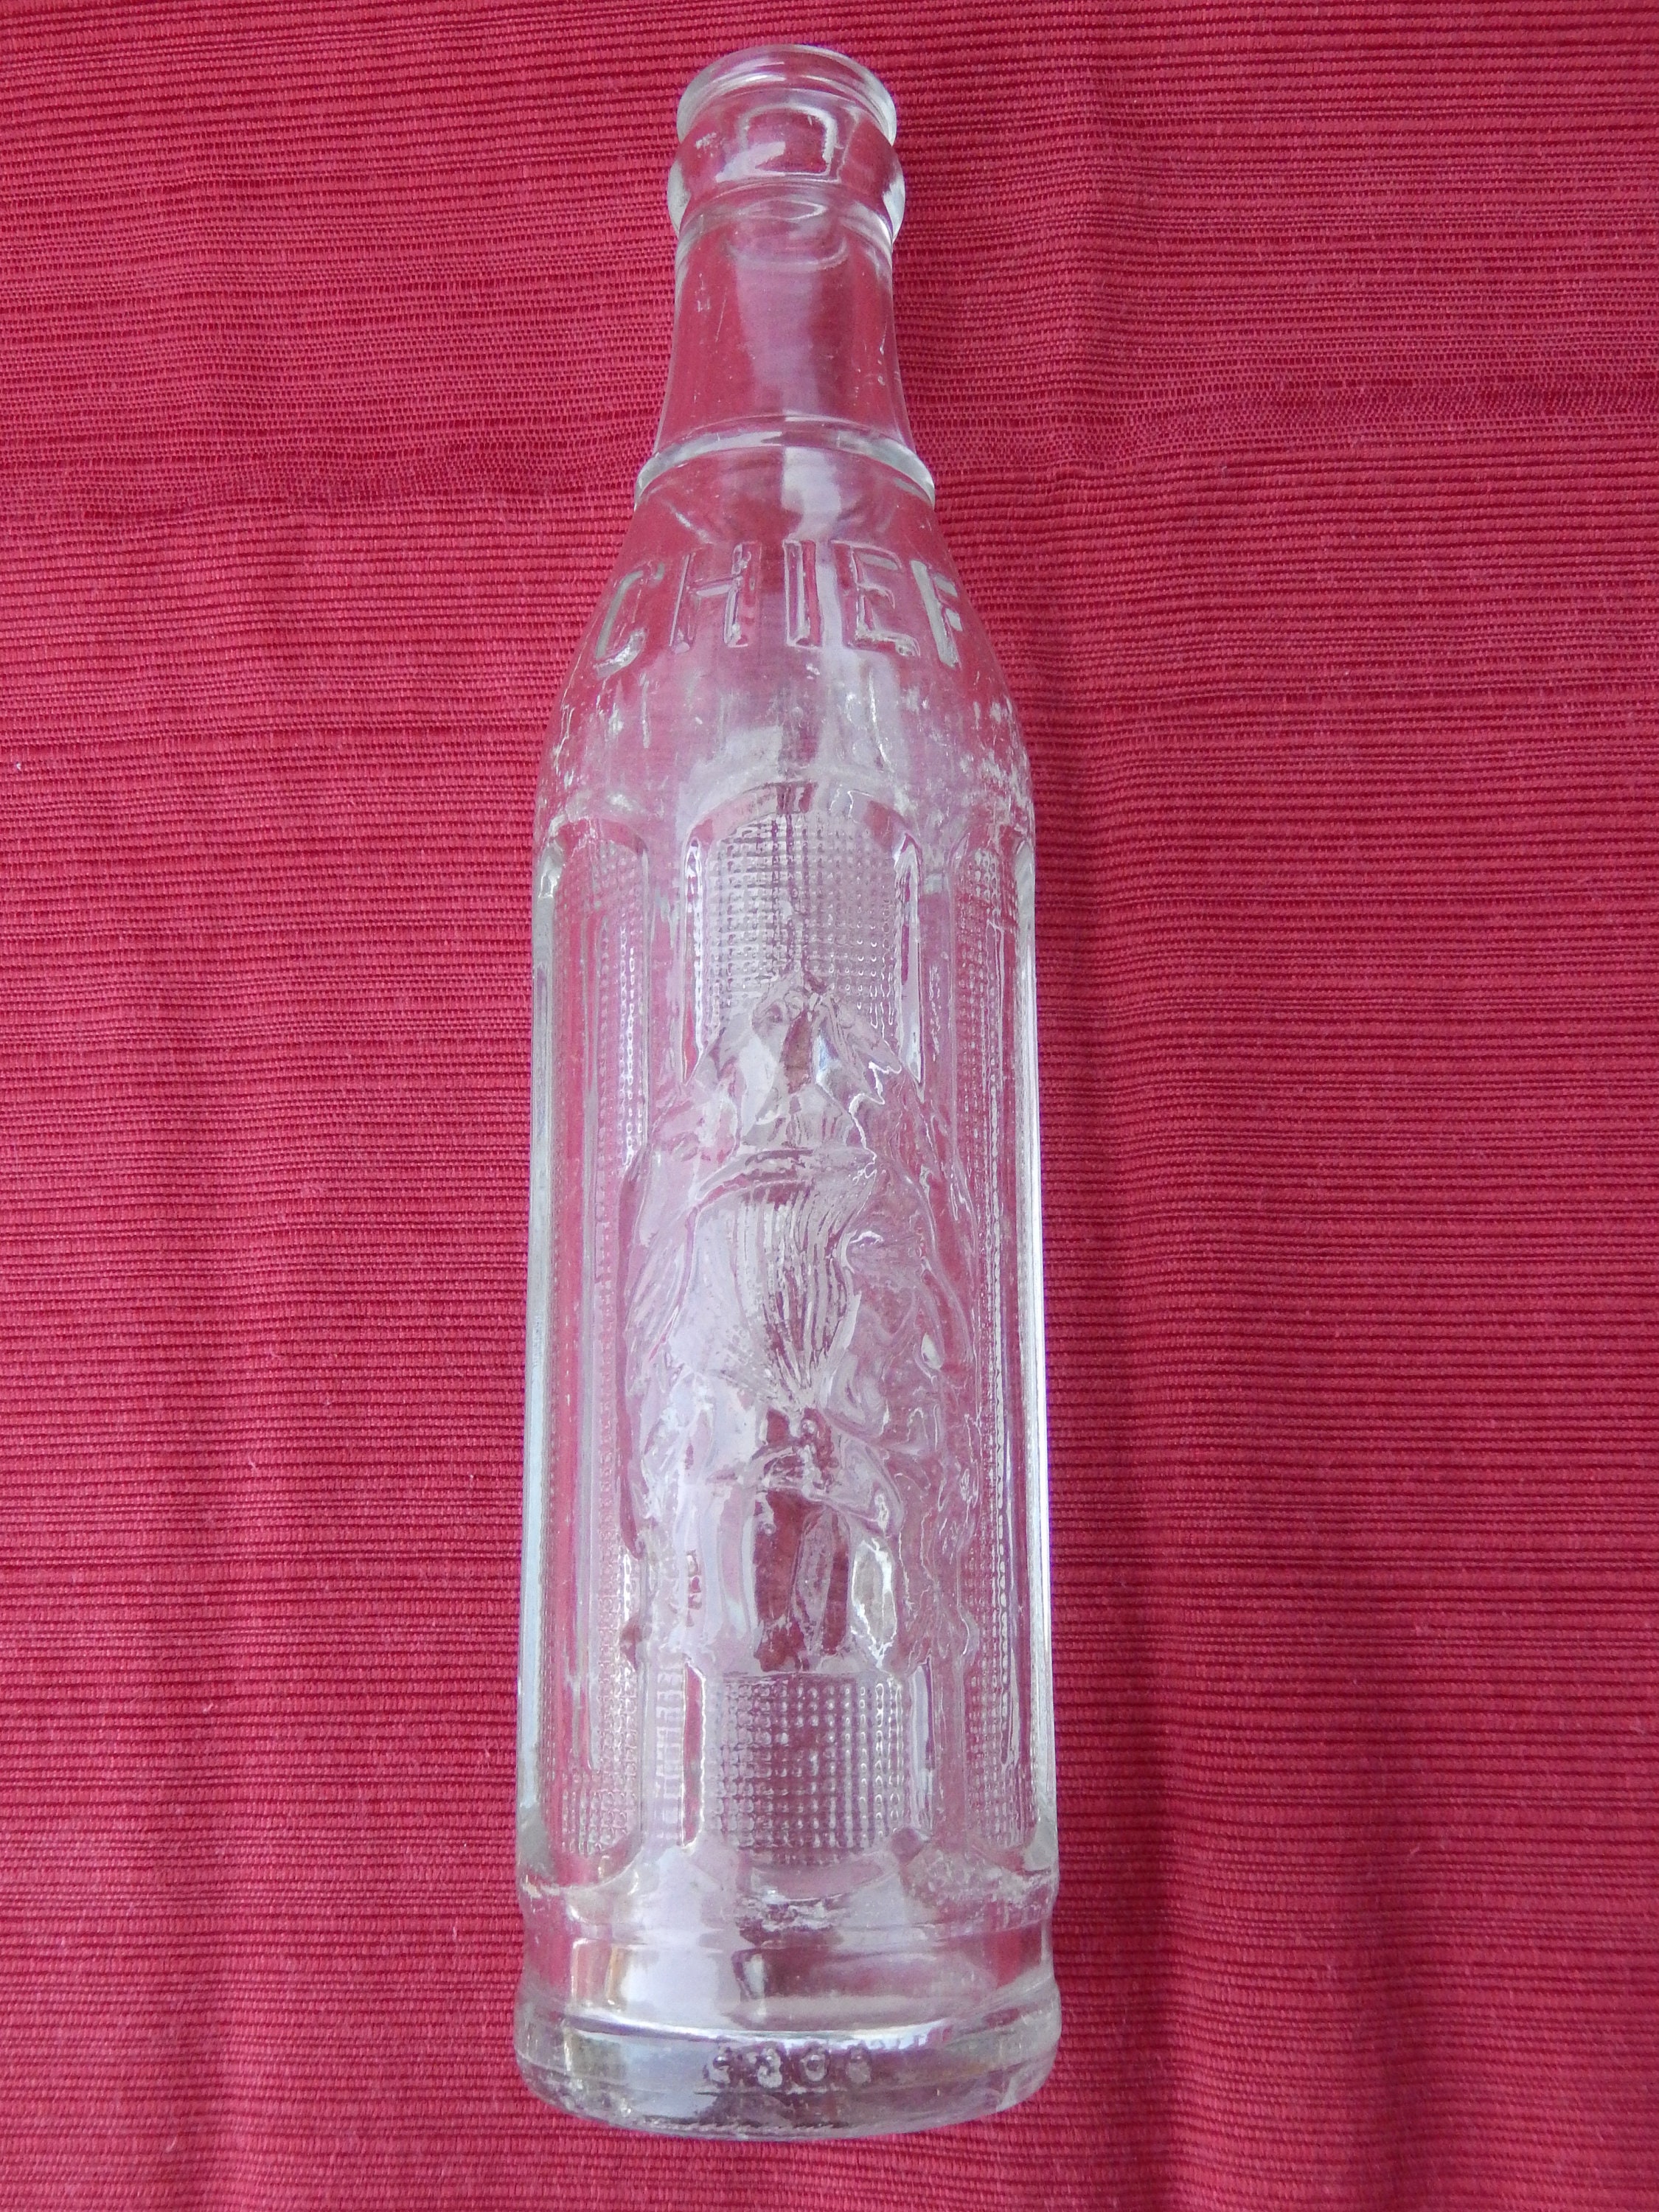 Vintage Double Cola Soda Bottle 12 Oz Embossed Clear Glass Bottle Not to Be  Refilled Collectible Advertising Panchosporch 